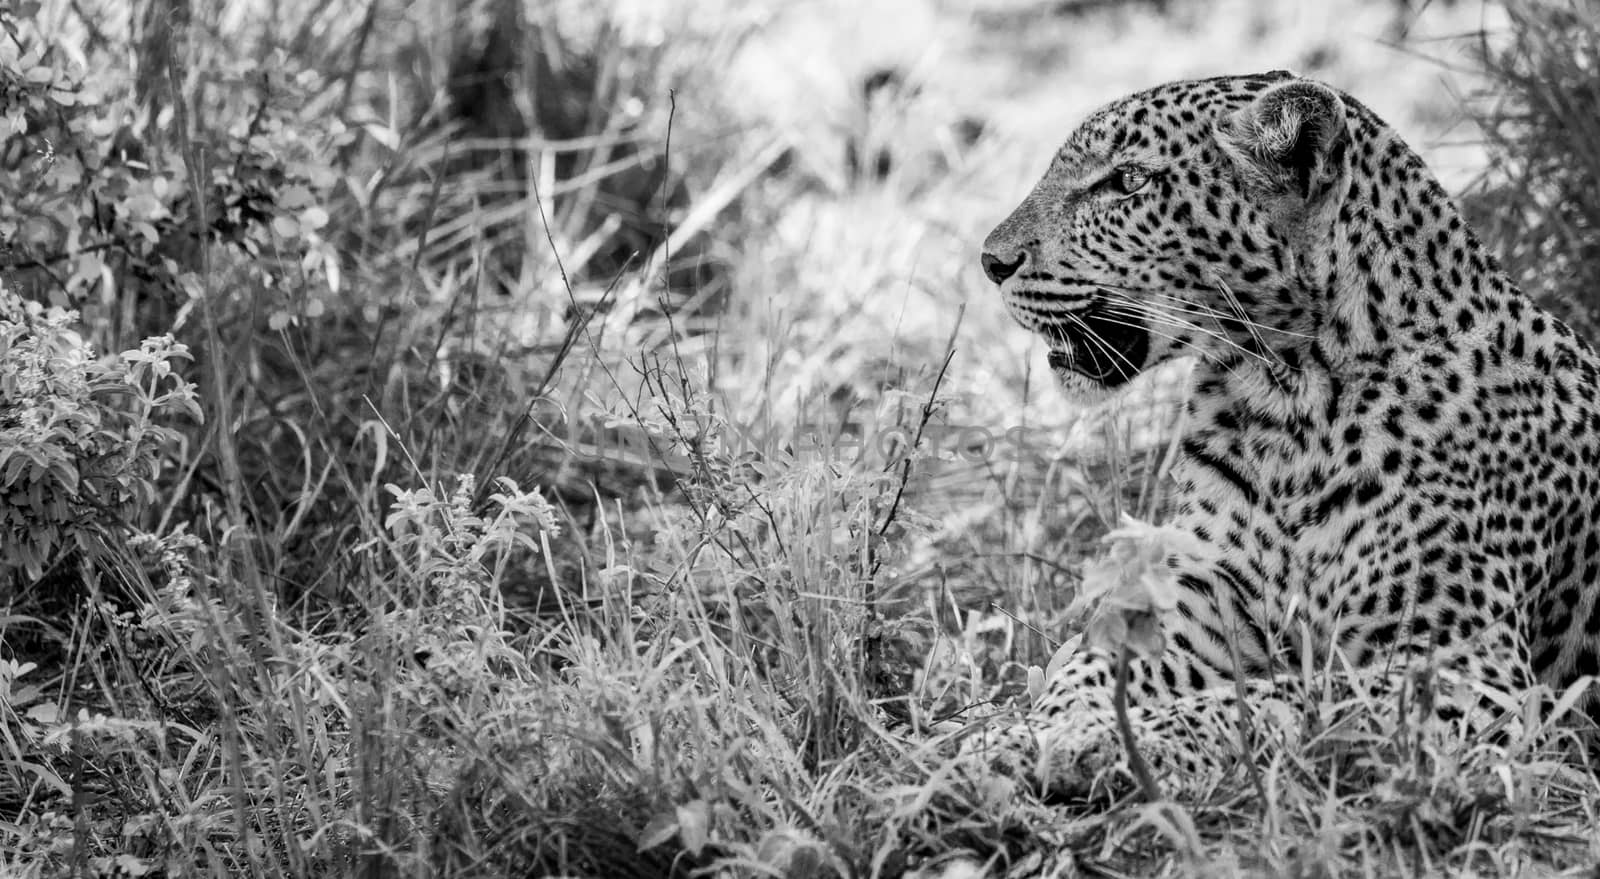 Leopard in the grass in black and white in the Kruger National Park, South Africa. by Simoneemanphotography